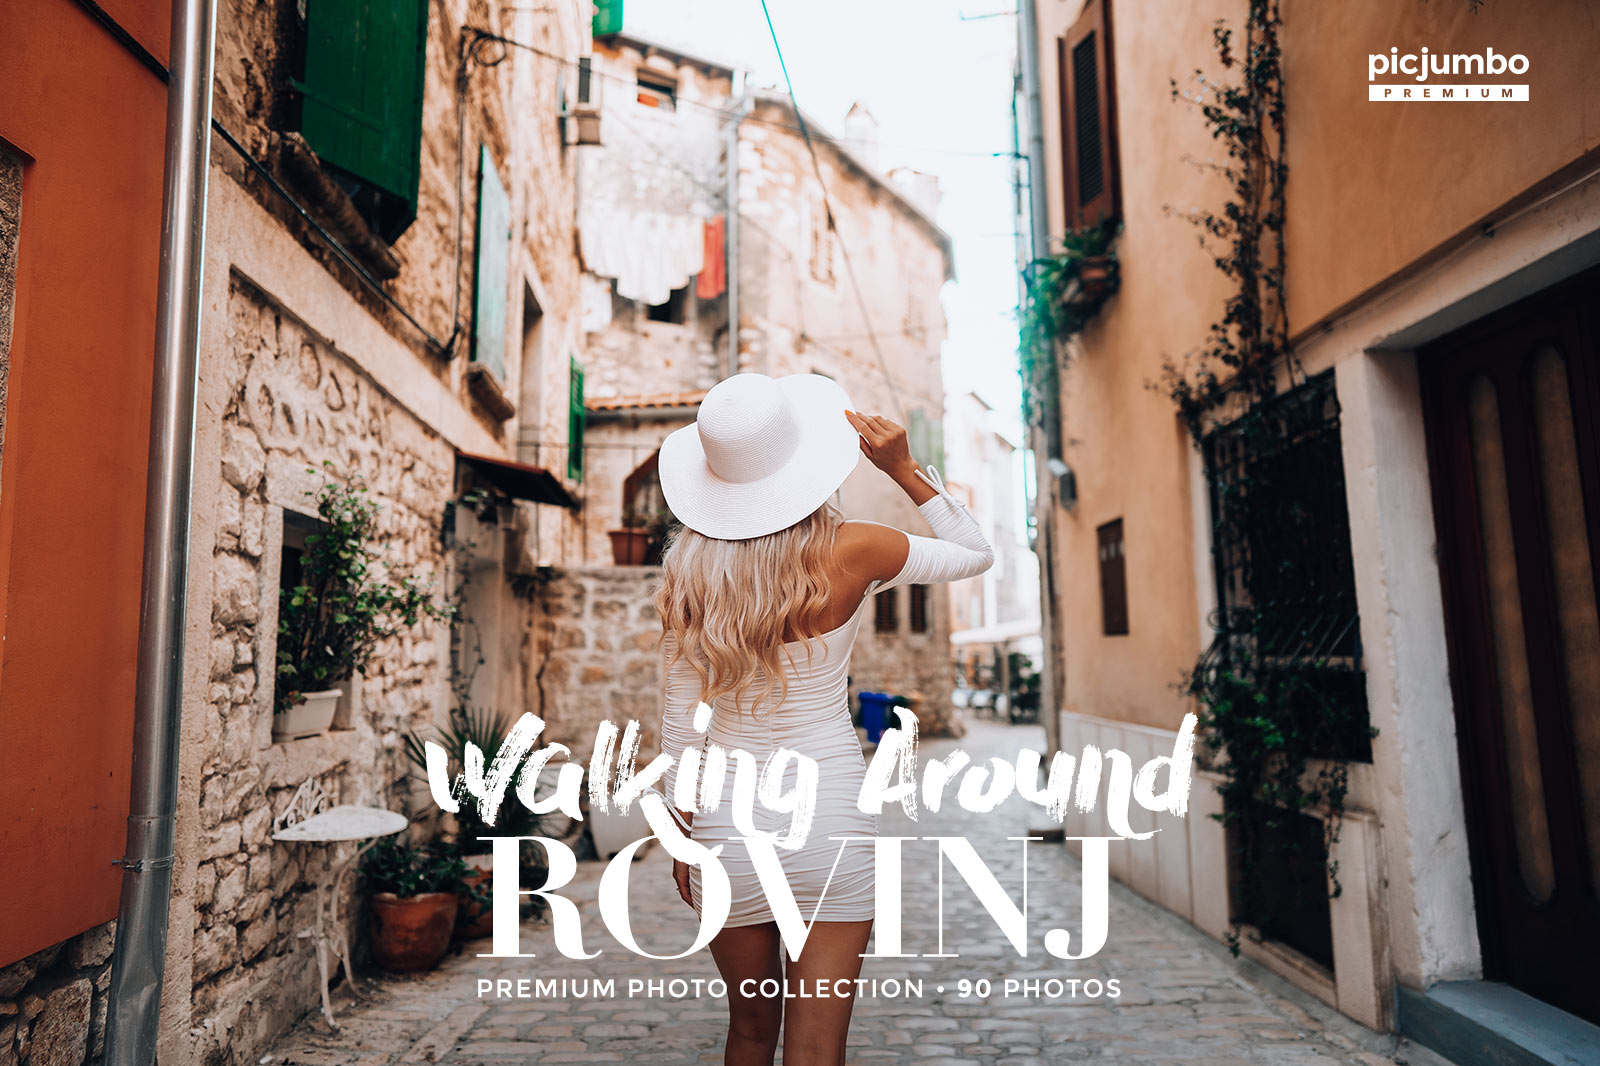 Download hi-res stock photos from our Walking Around Rovinj PREMIUM Collection!